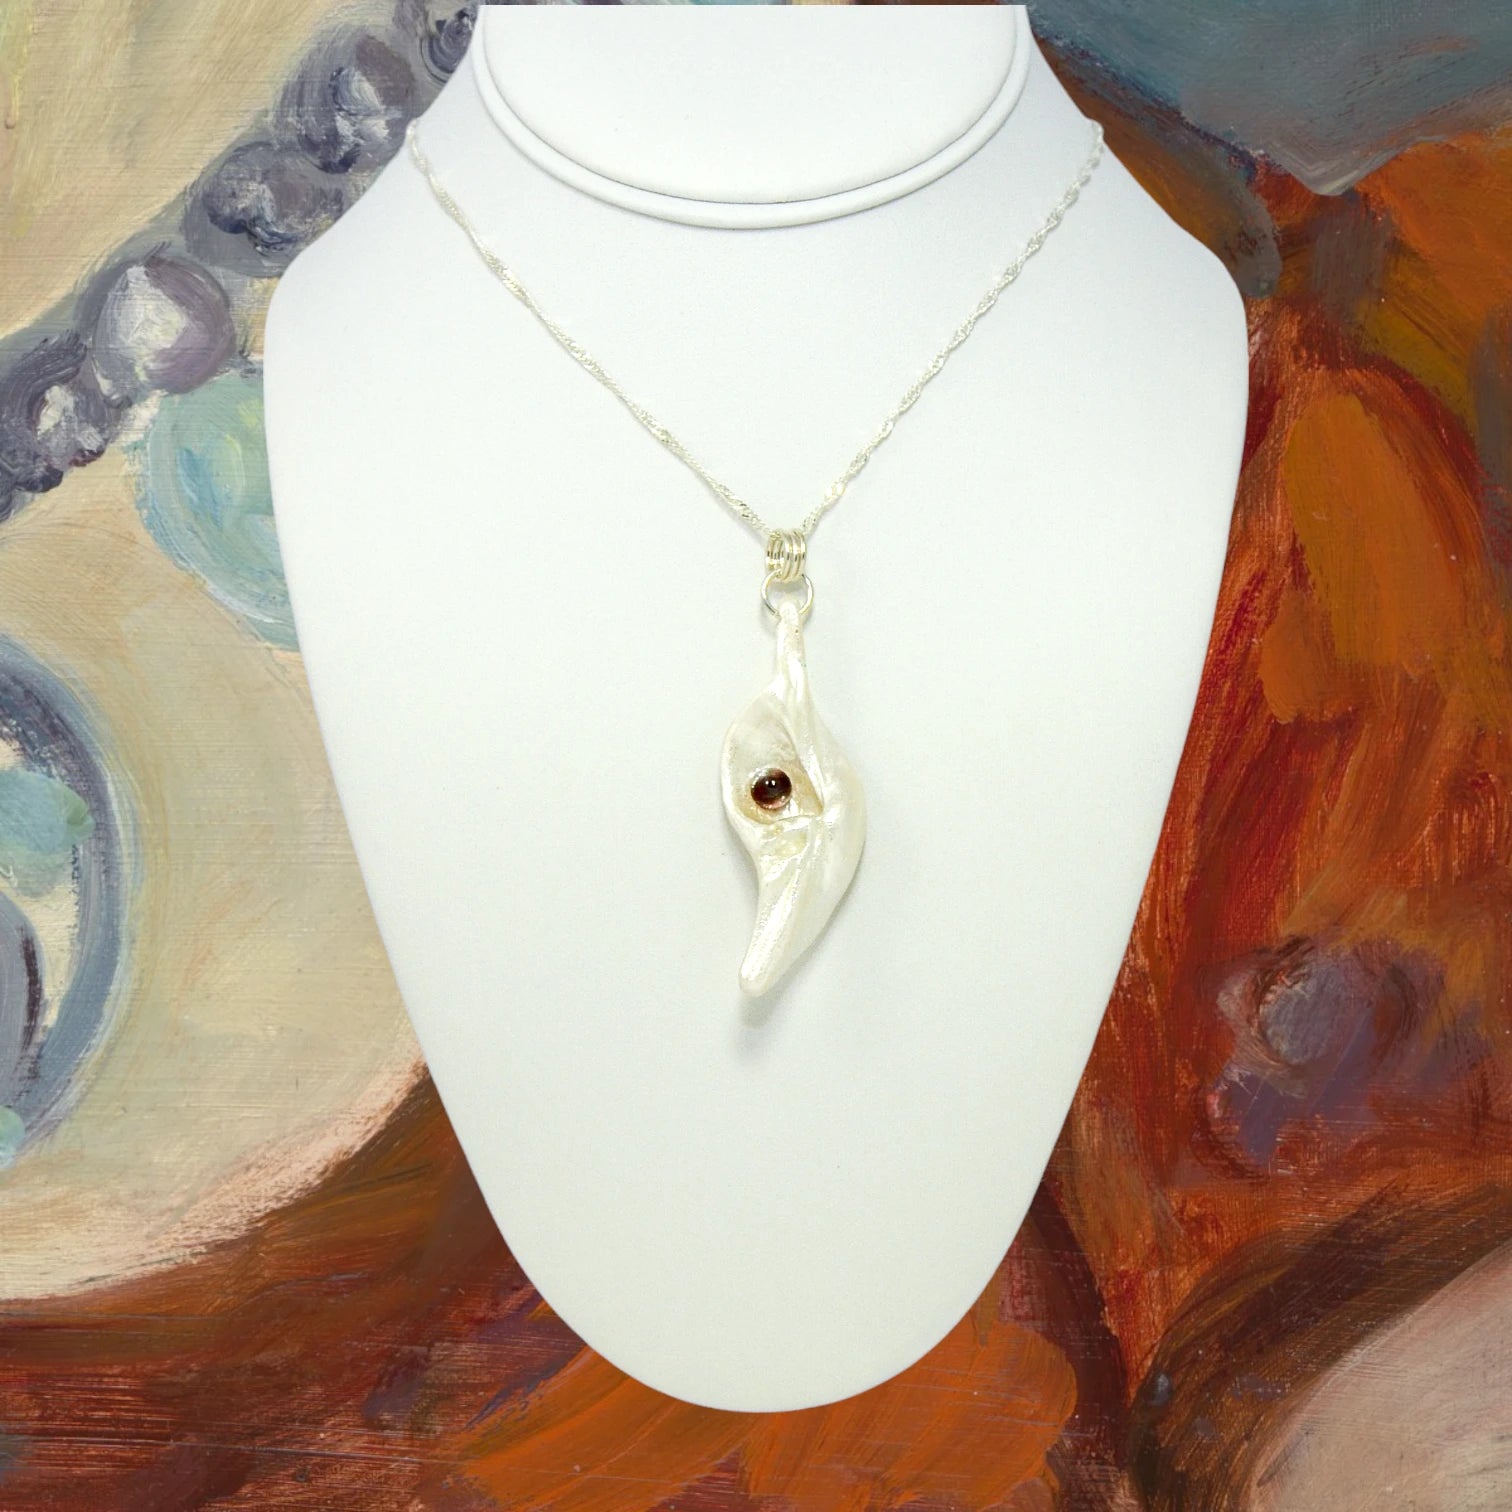 Pomegranate natural seashell pendant is adorned with a stunning Garnet gemstone. The pendant is shown on a white necklace displayer .  The background is of a painting.